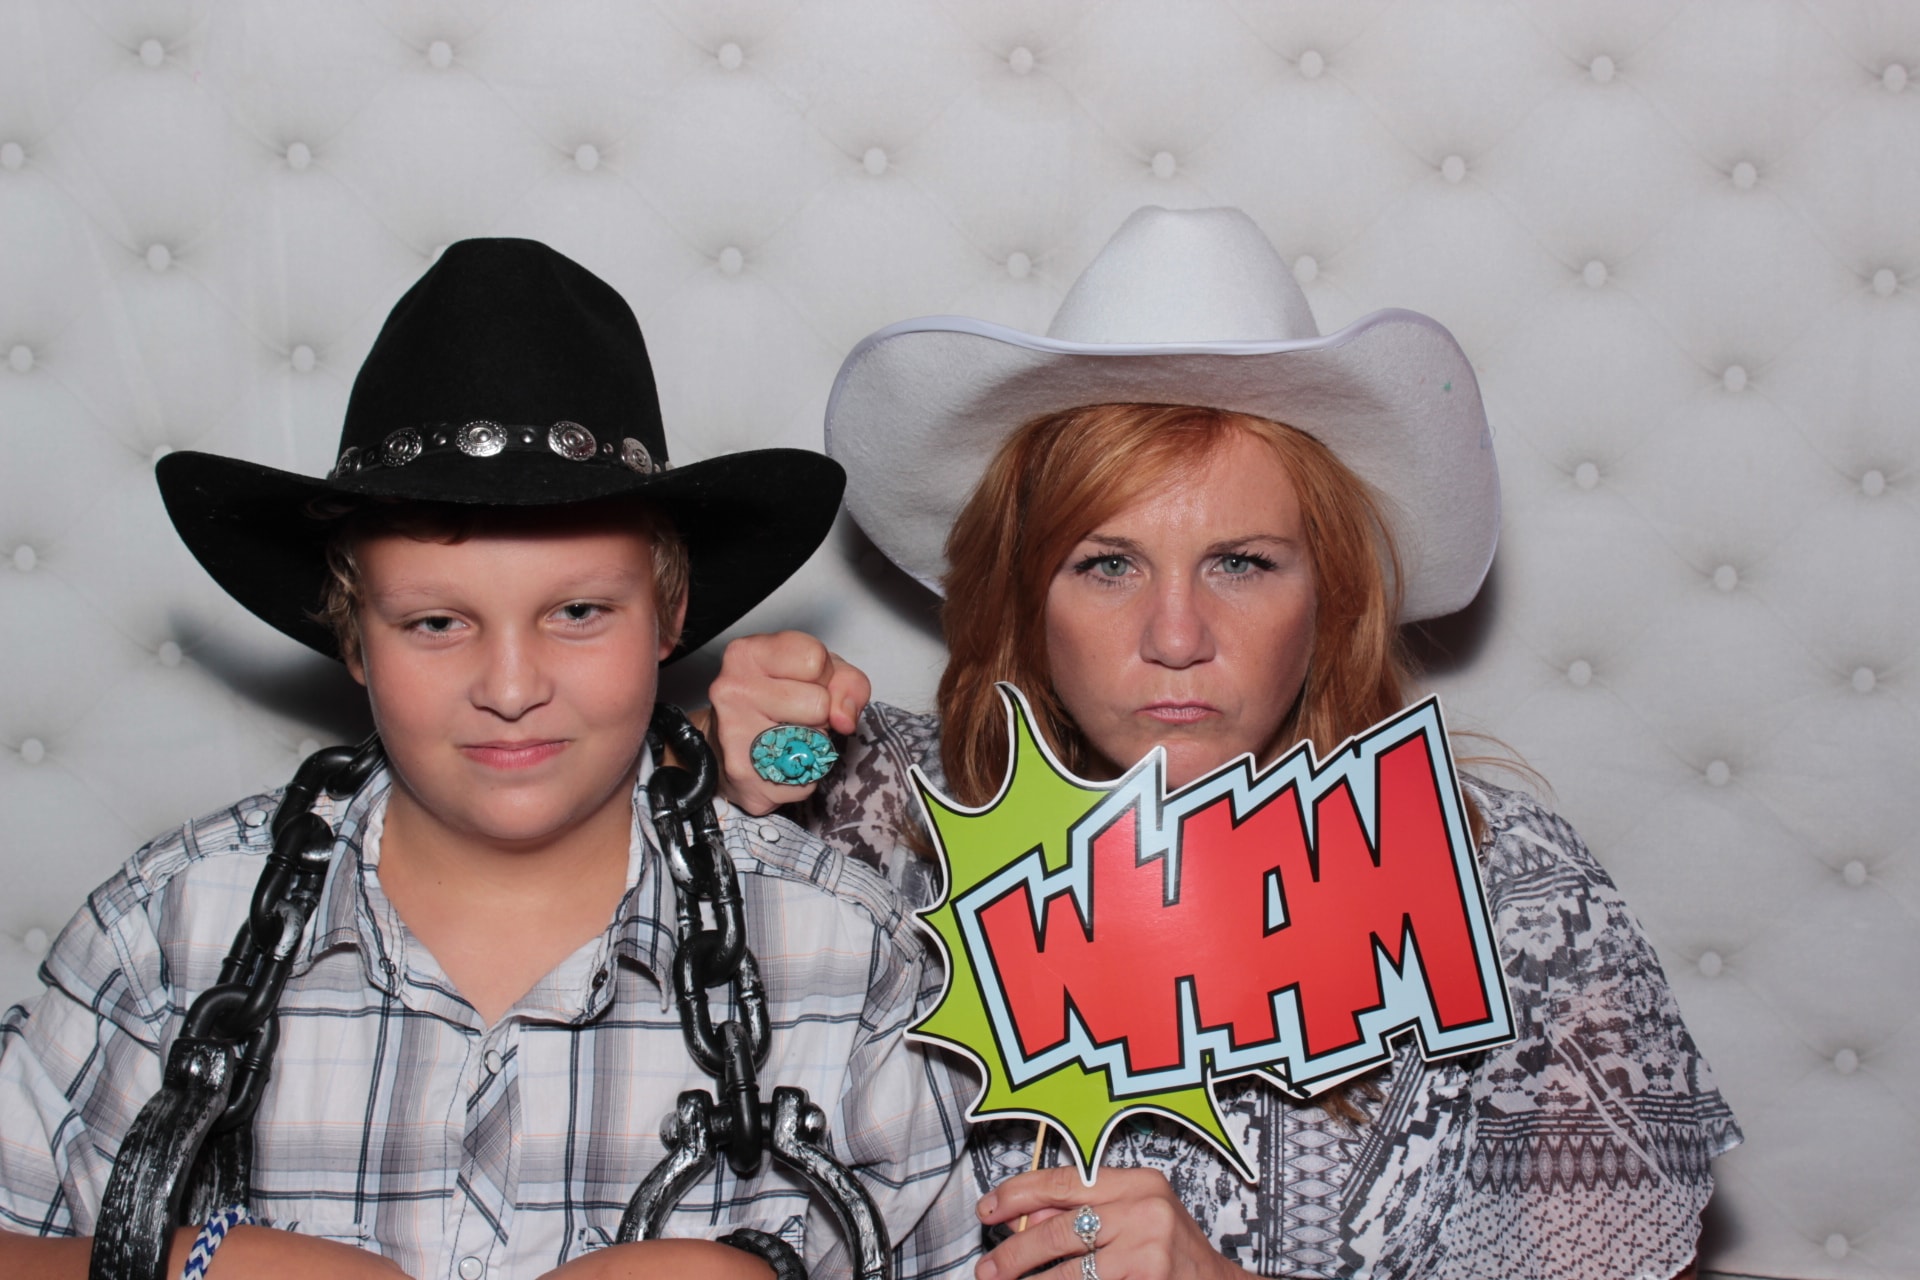 Photo-Booth-Rental-Dripping-Springs-Wedding-Reception-Party-Awesome-No.1-Affordable-Social-Media-Best-LGBT-